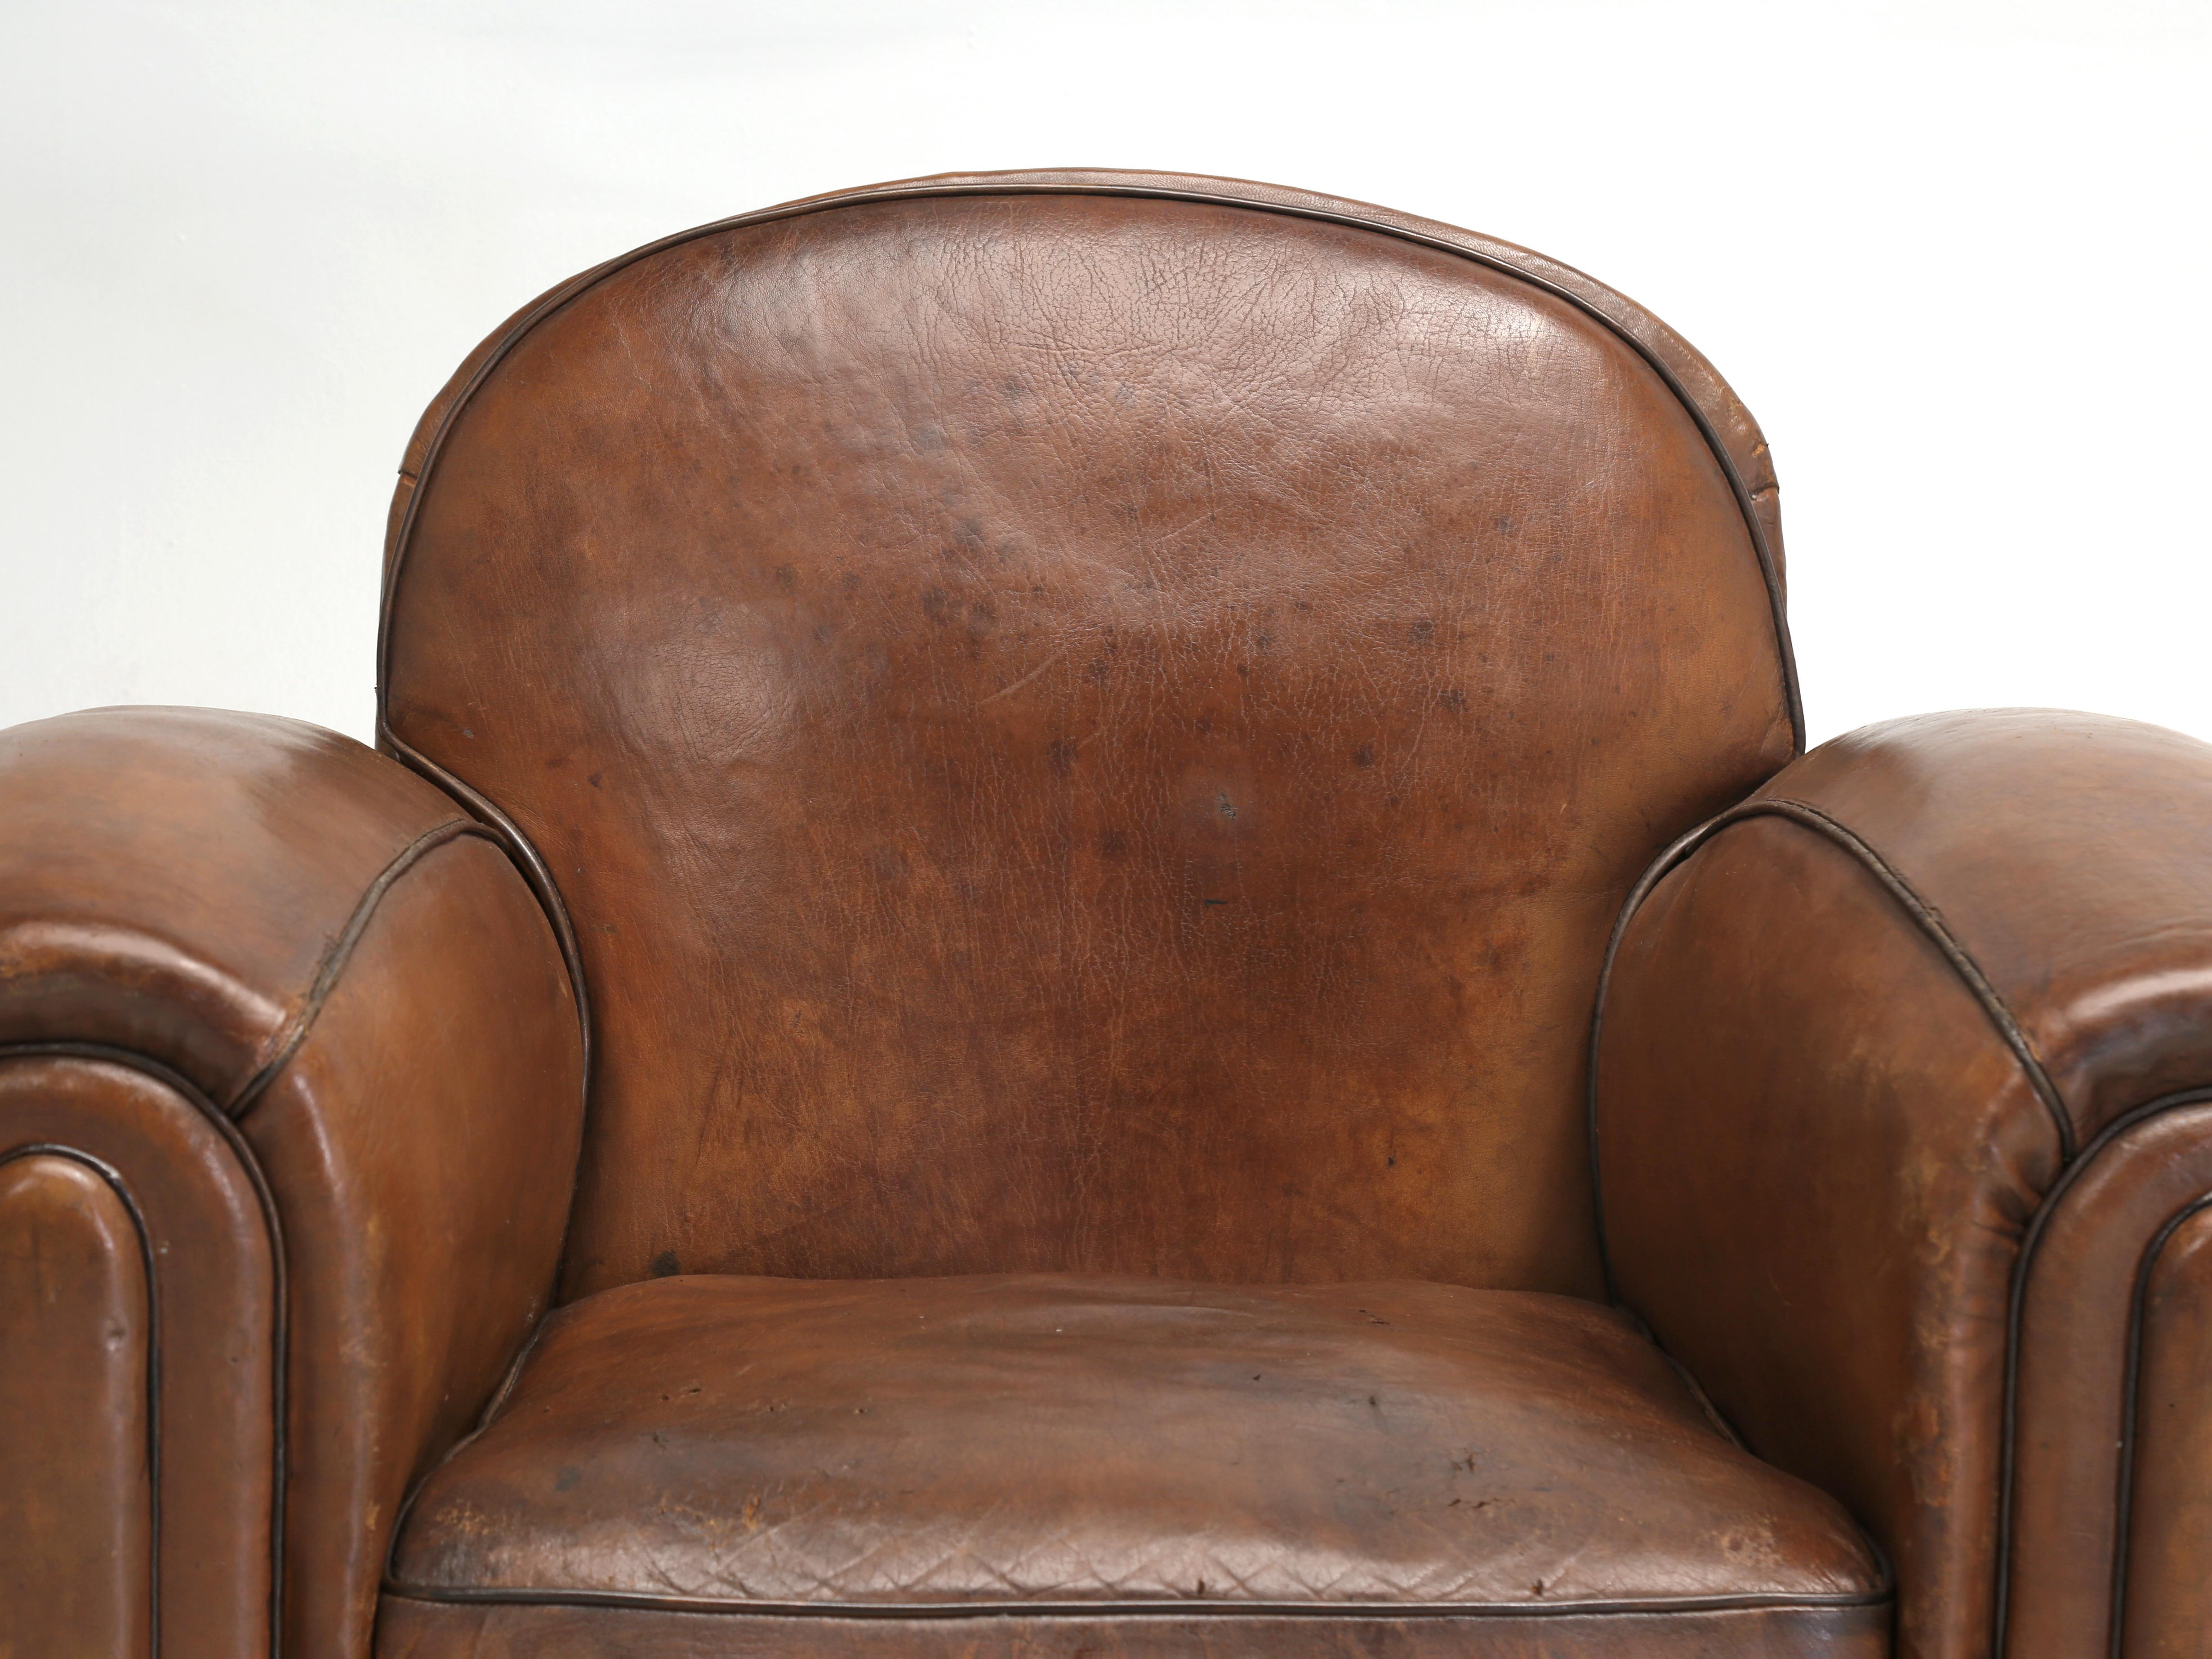 French Leather Club Chairs that have been painstakingly restored from the inside out, while at the same time leaving their original French leather coverings intact. And speaking of the Original French Leather Club Chairs leather and color, I am not